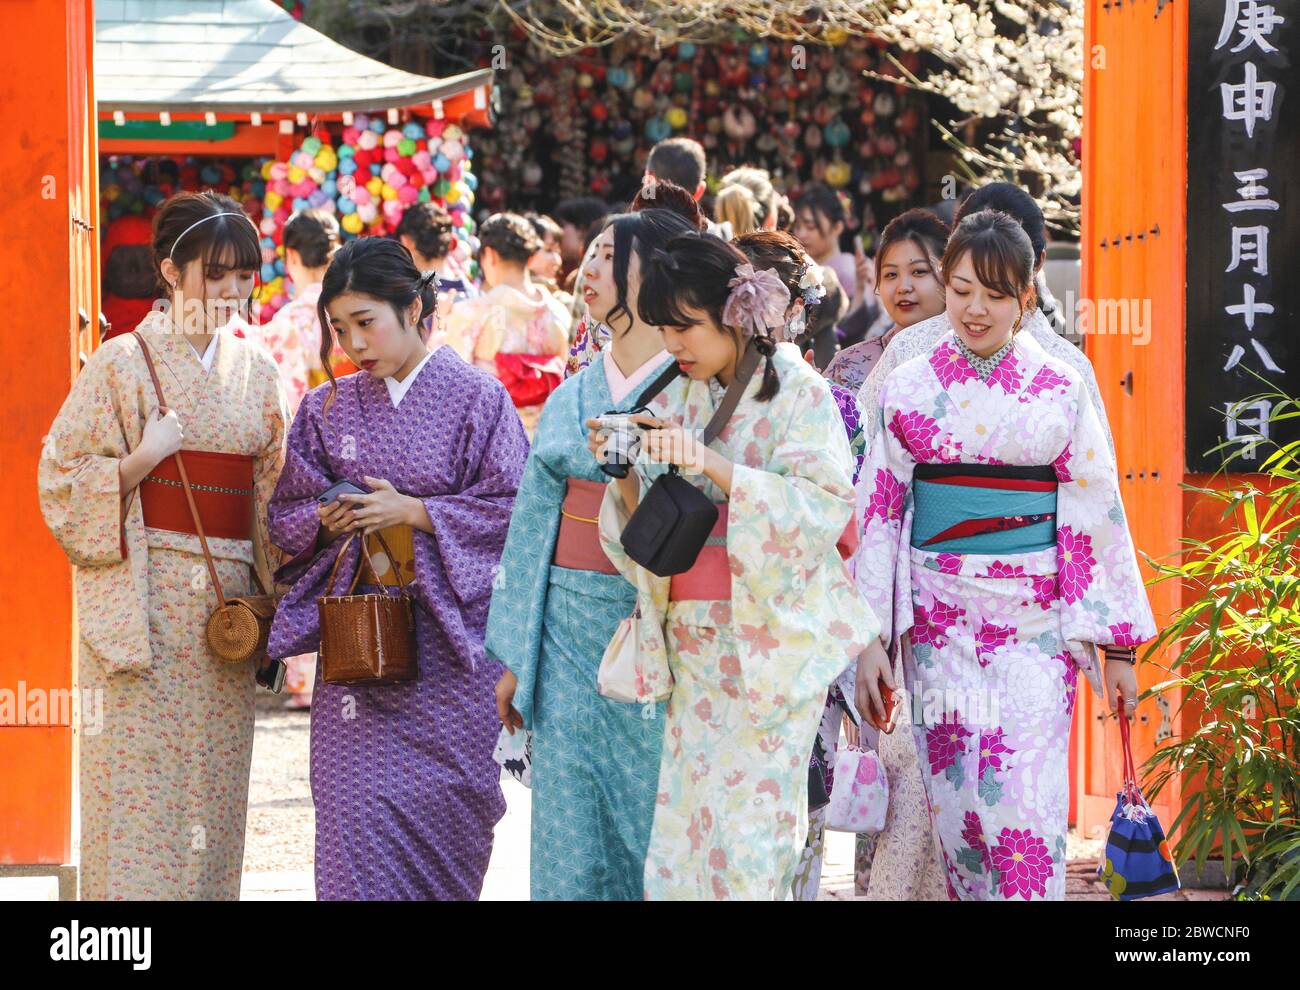 Group of young Japanese girls in traditional kimono costumes walking on the street in Kyoto, Japan Stock Photo